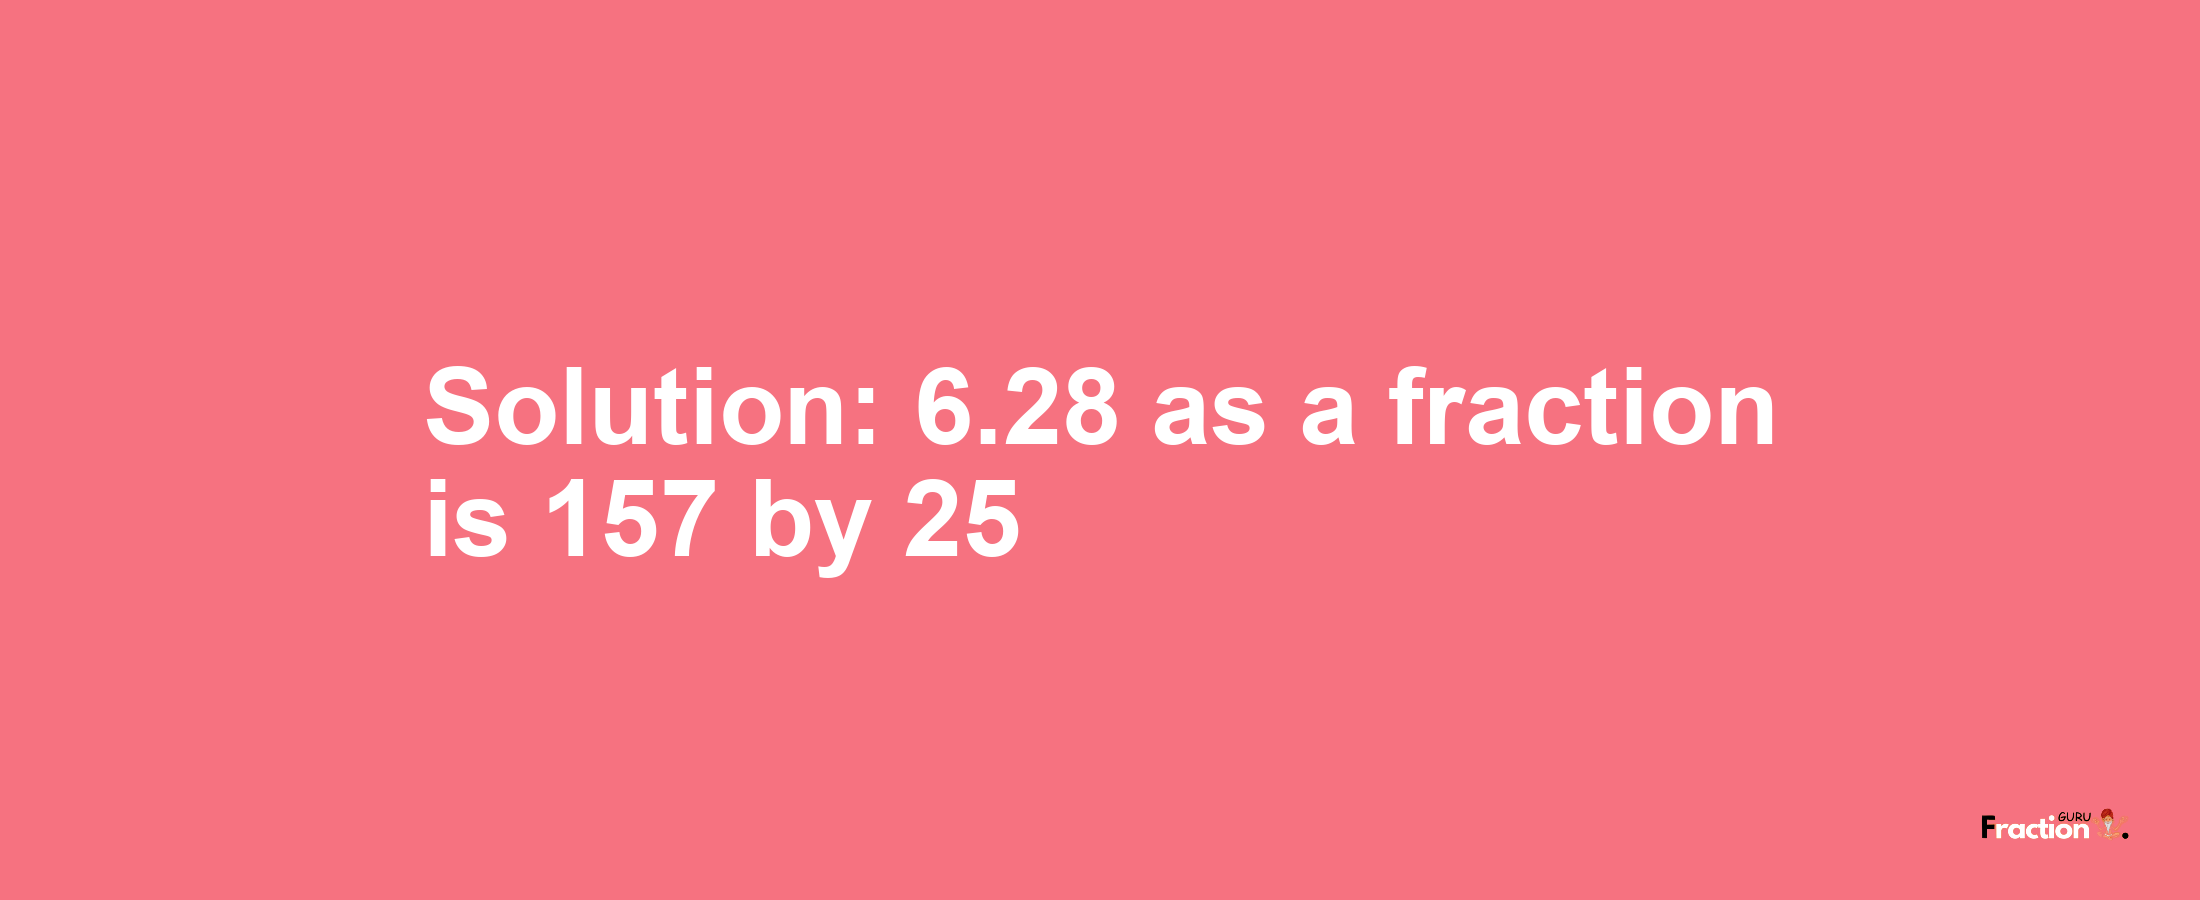 Solution:6.28 as a fraction is 157/25